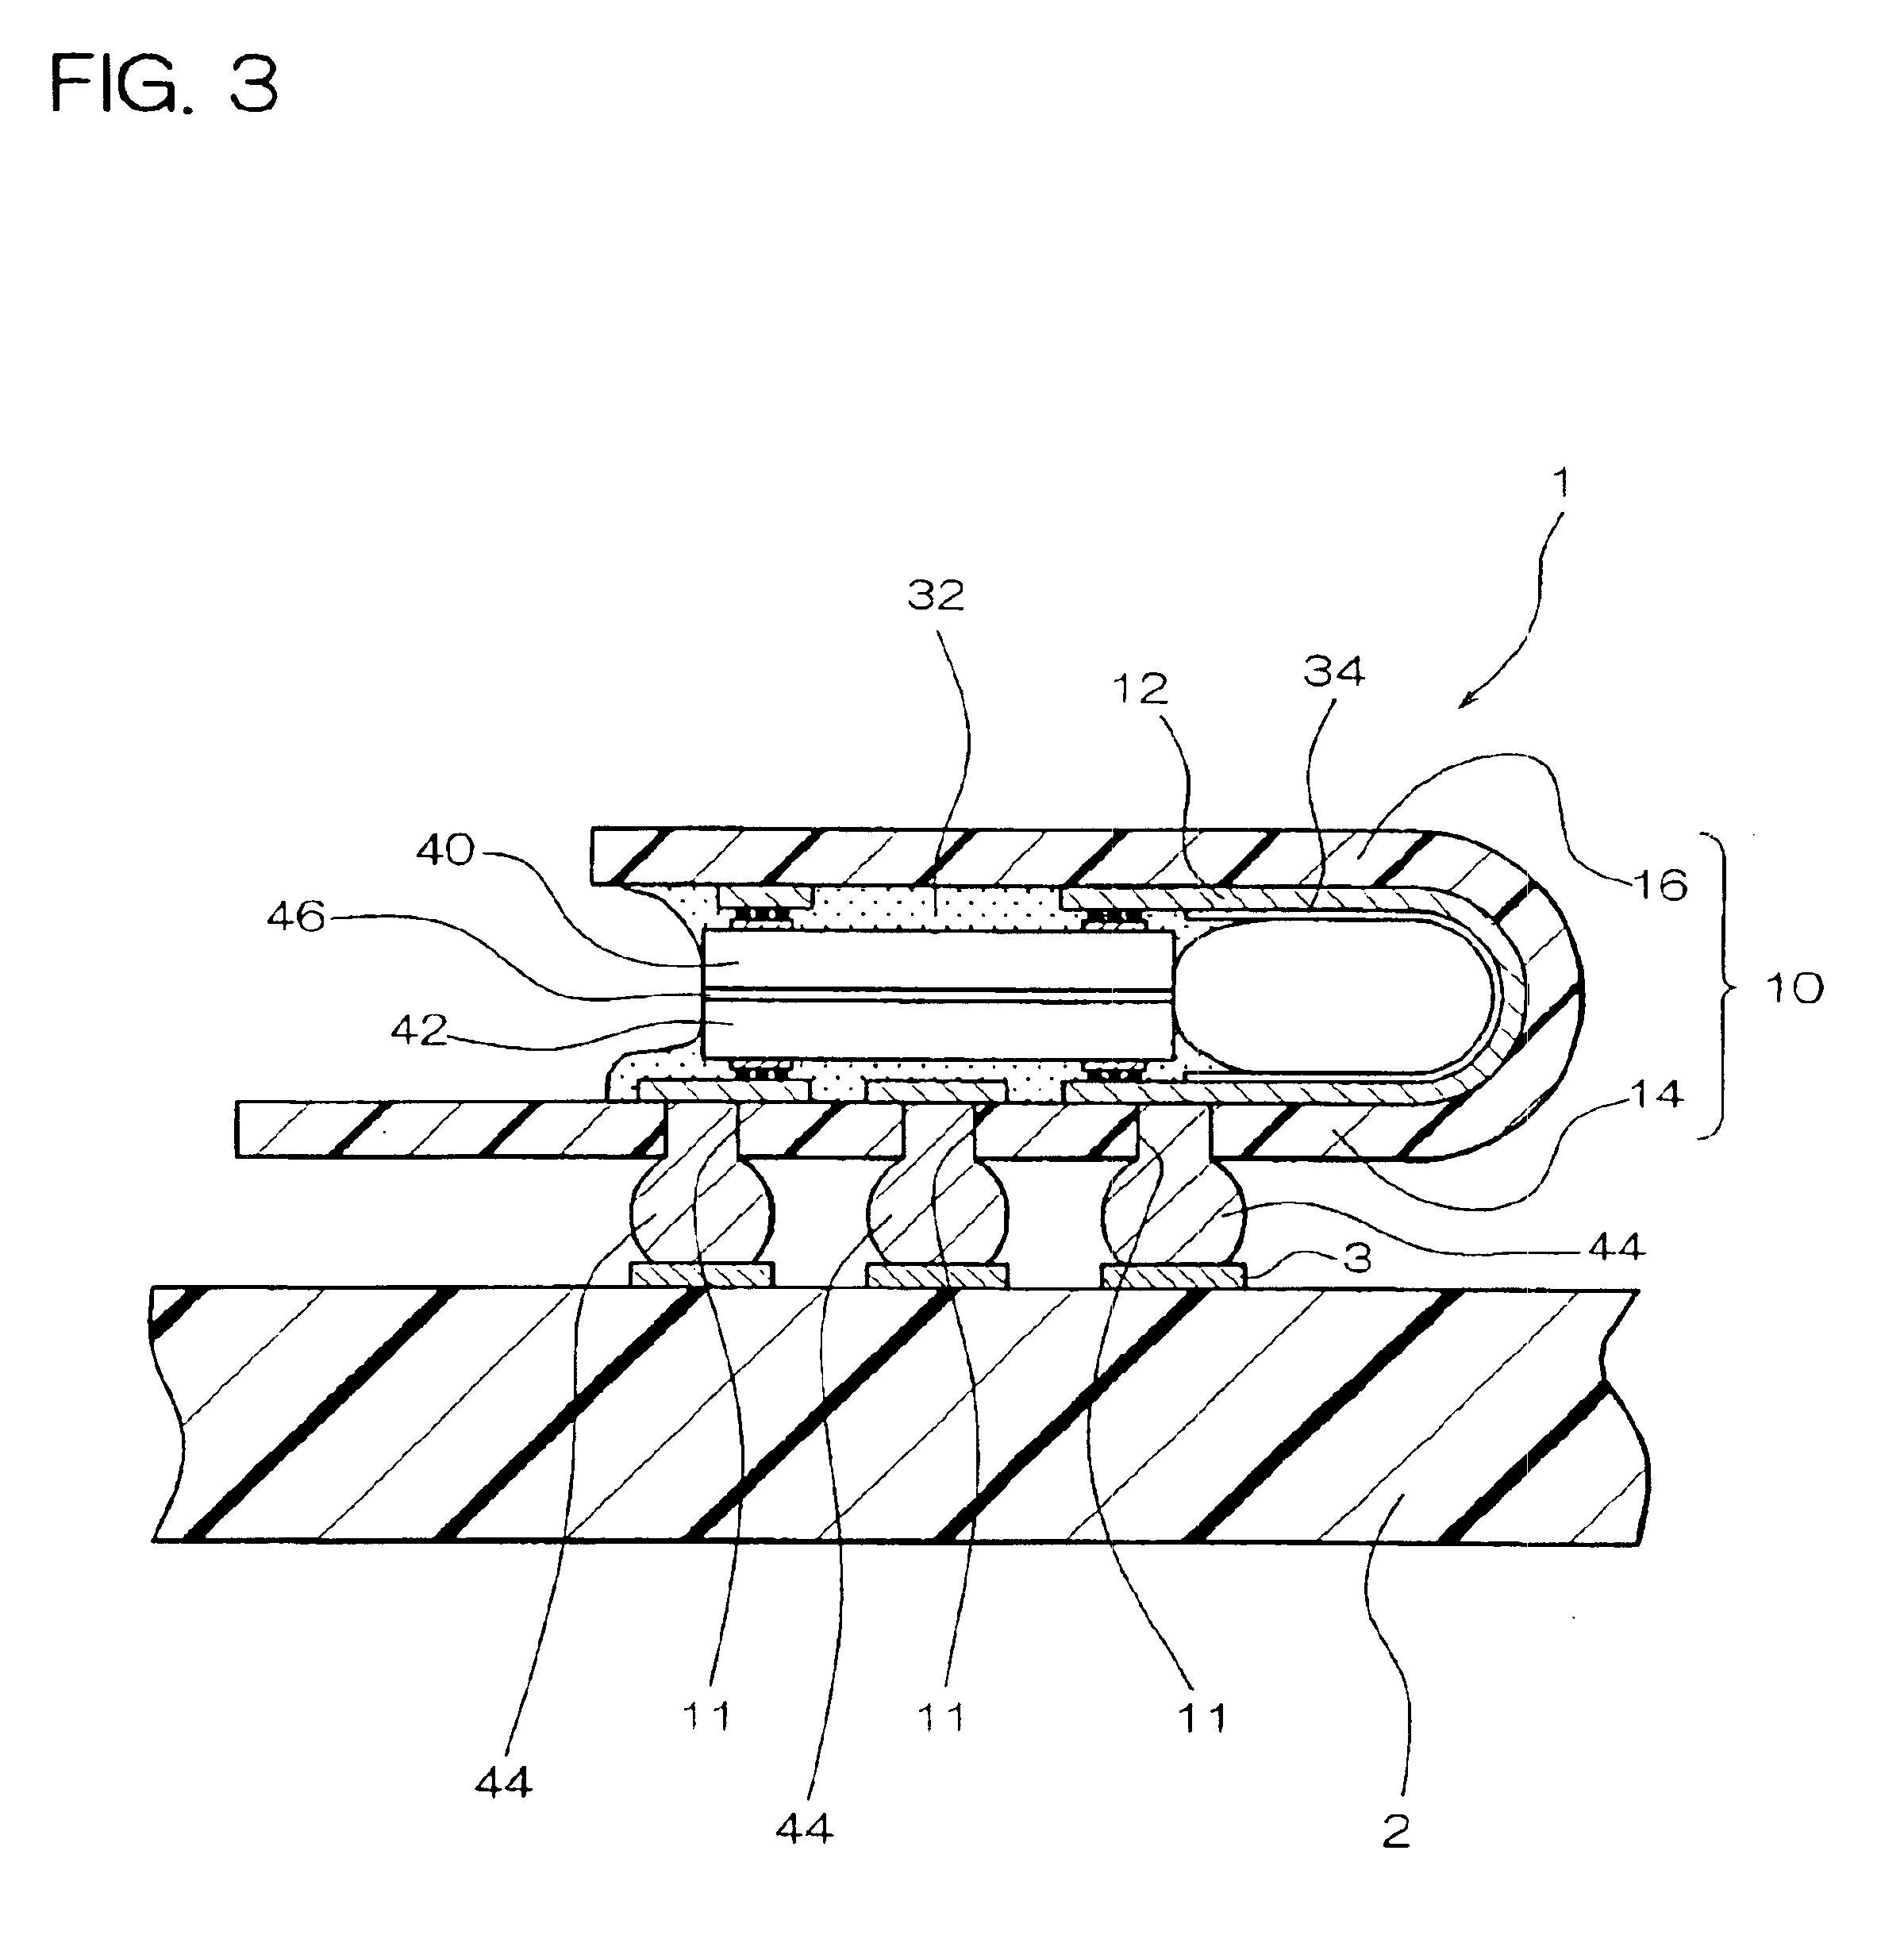 Interconnect substrate, semiconductor device, methods of fabricating, inspecting, and mounting the semiconductor device, circuit board, and electronic instrument